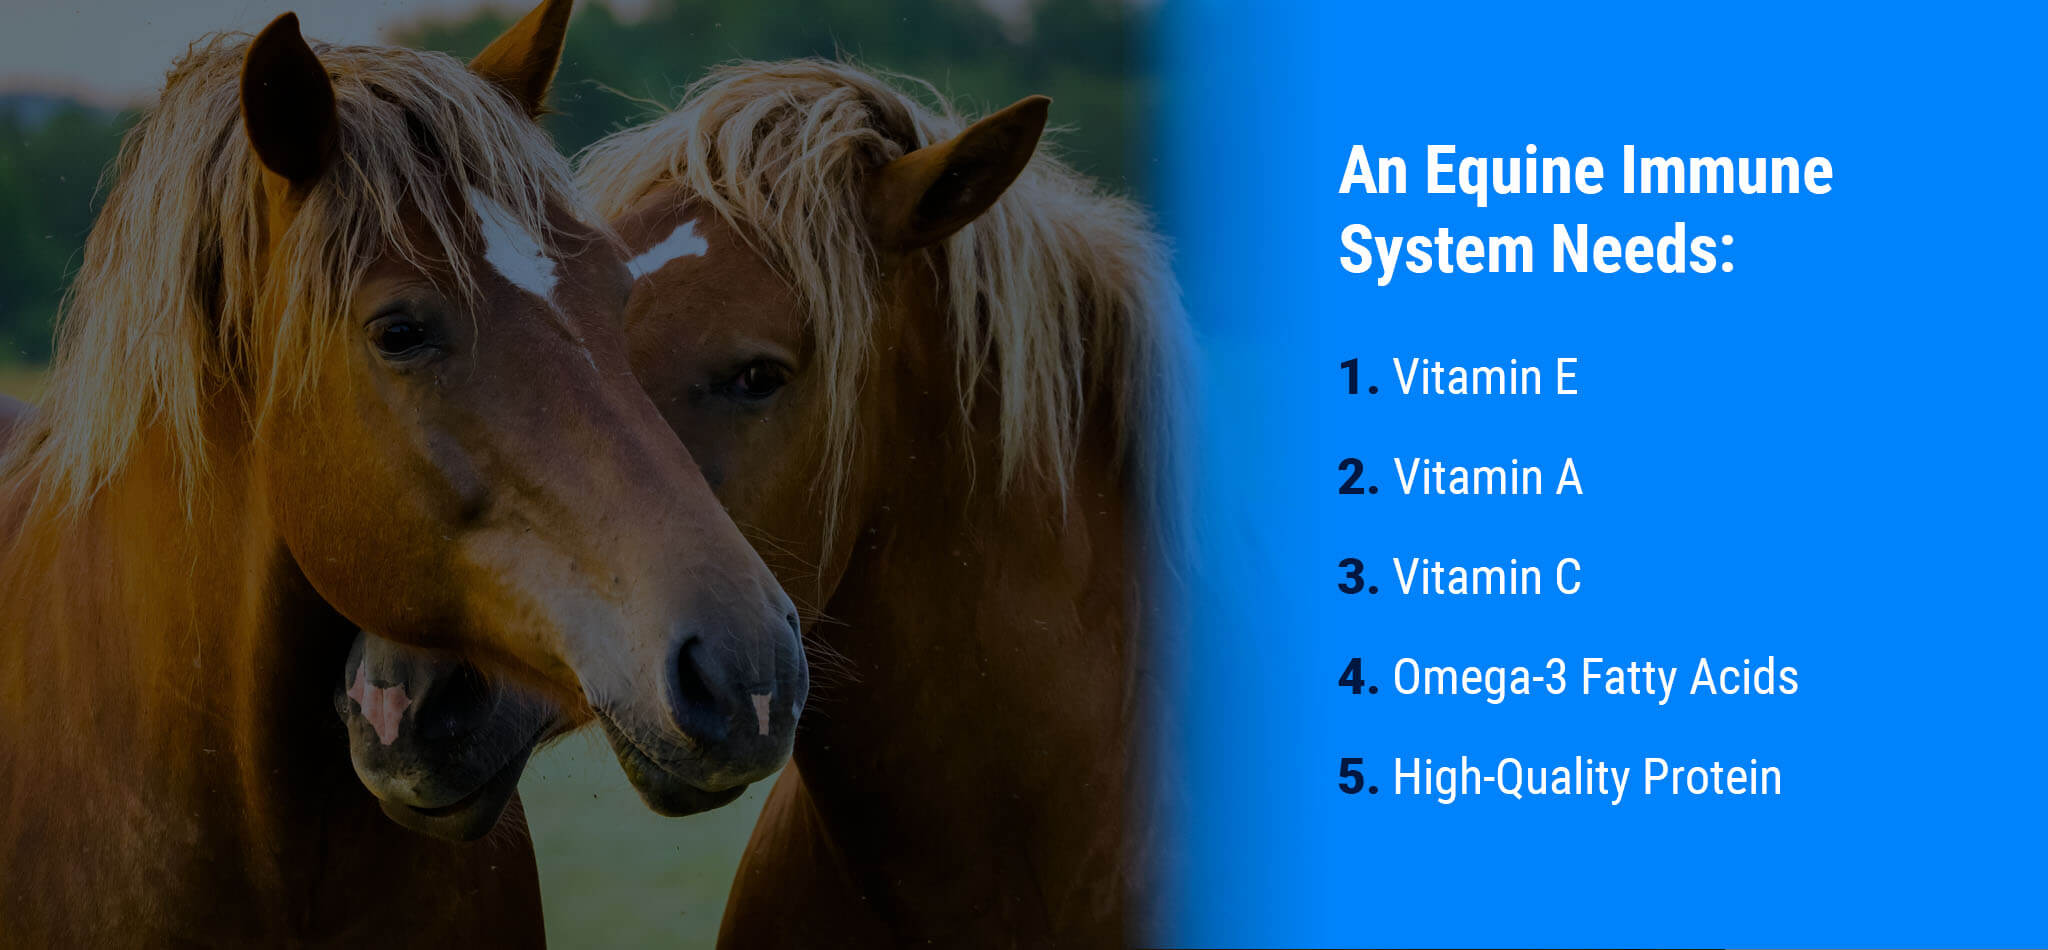 What Does the Equine Immune System Need?